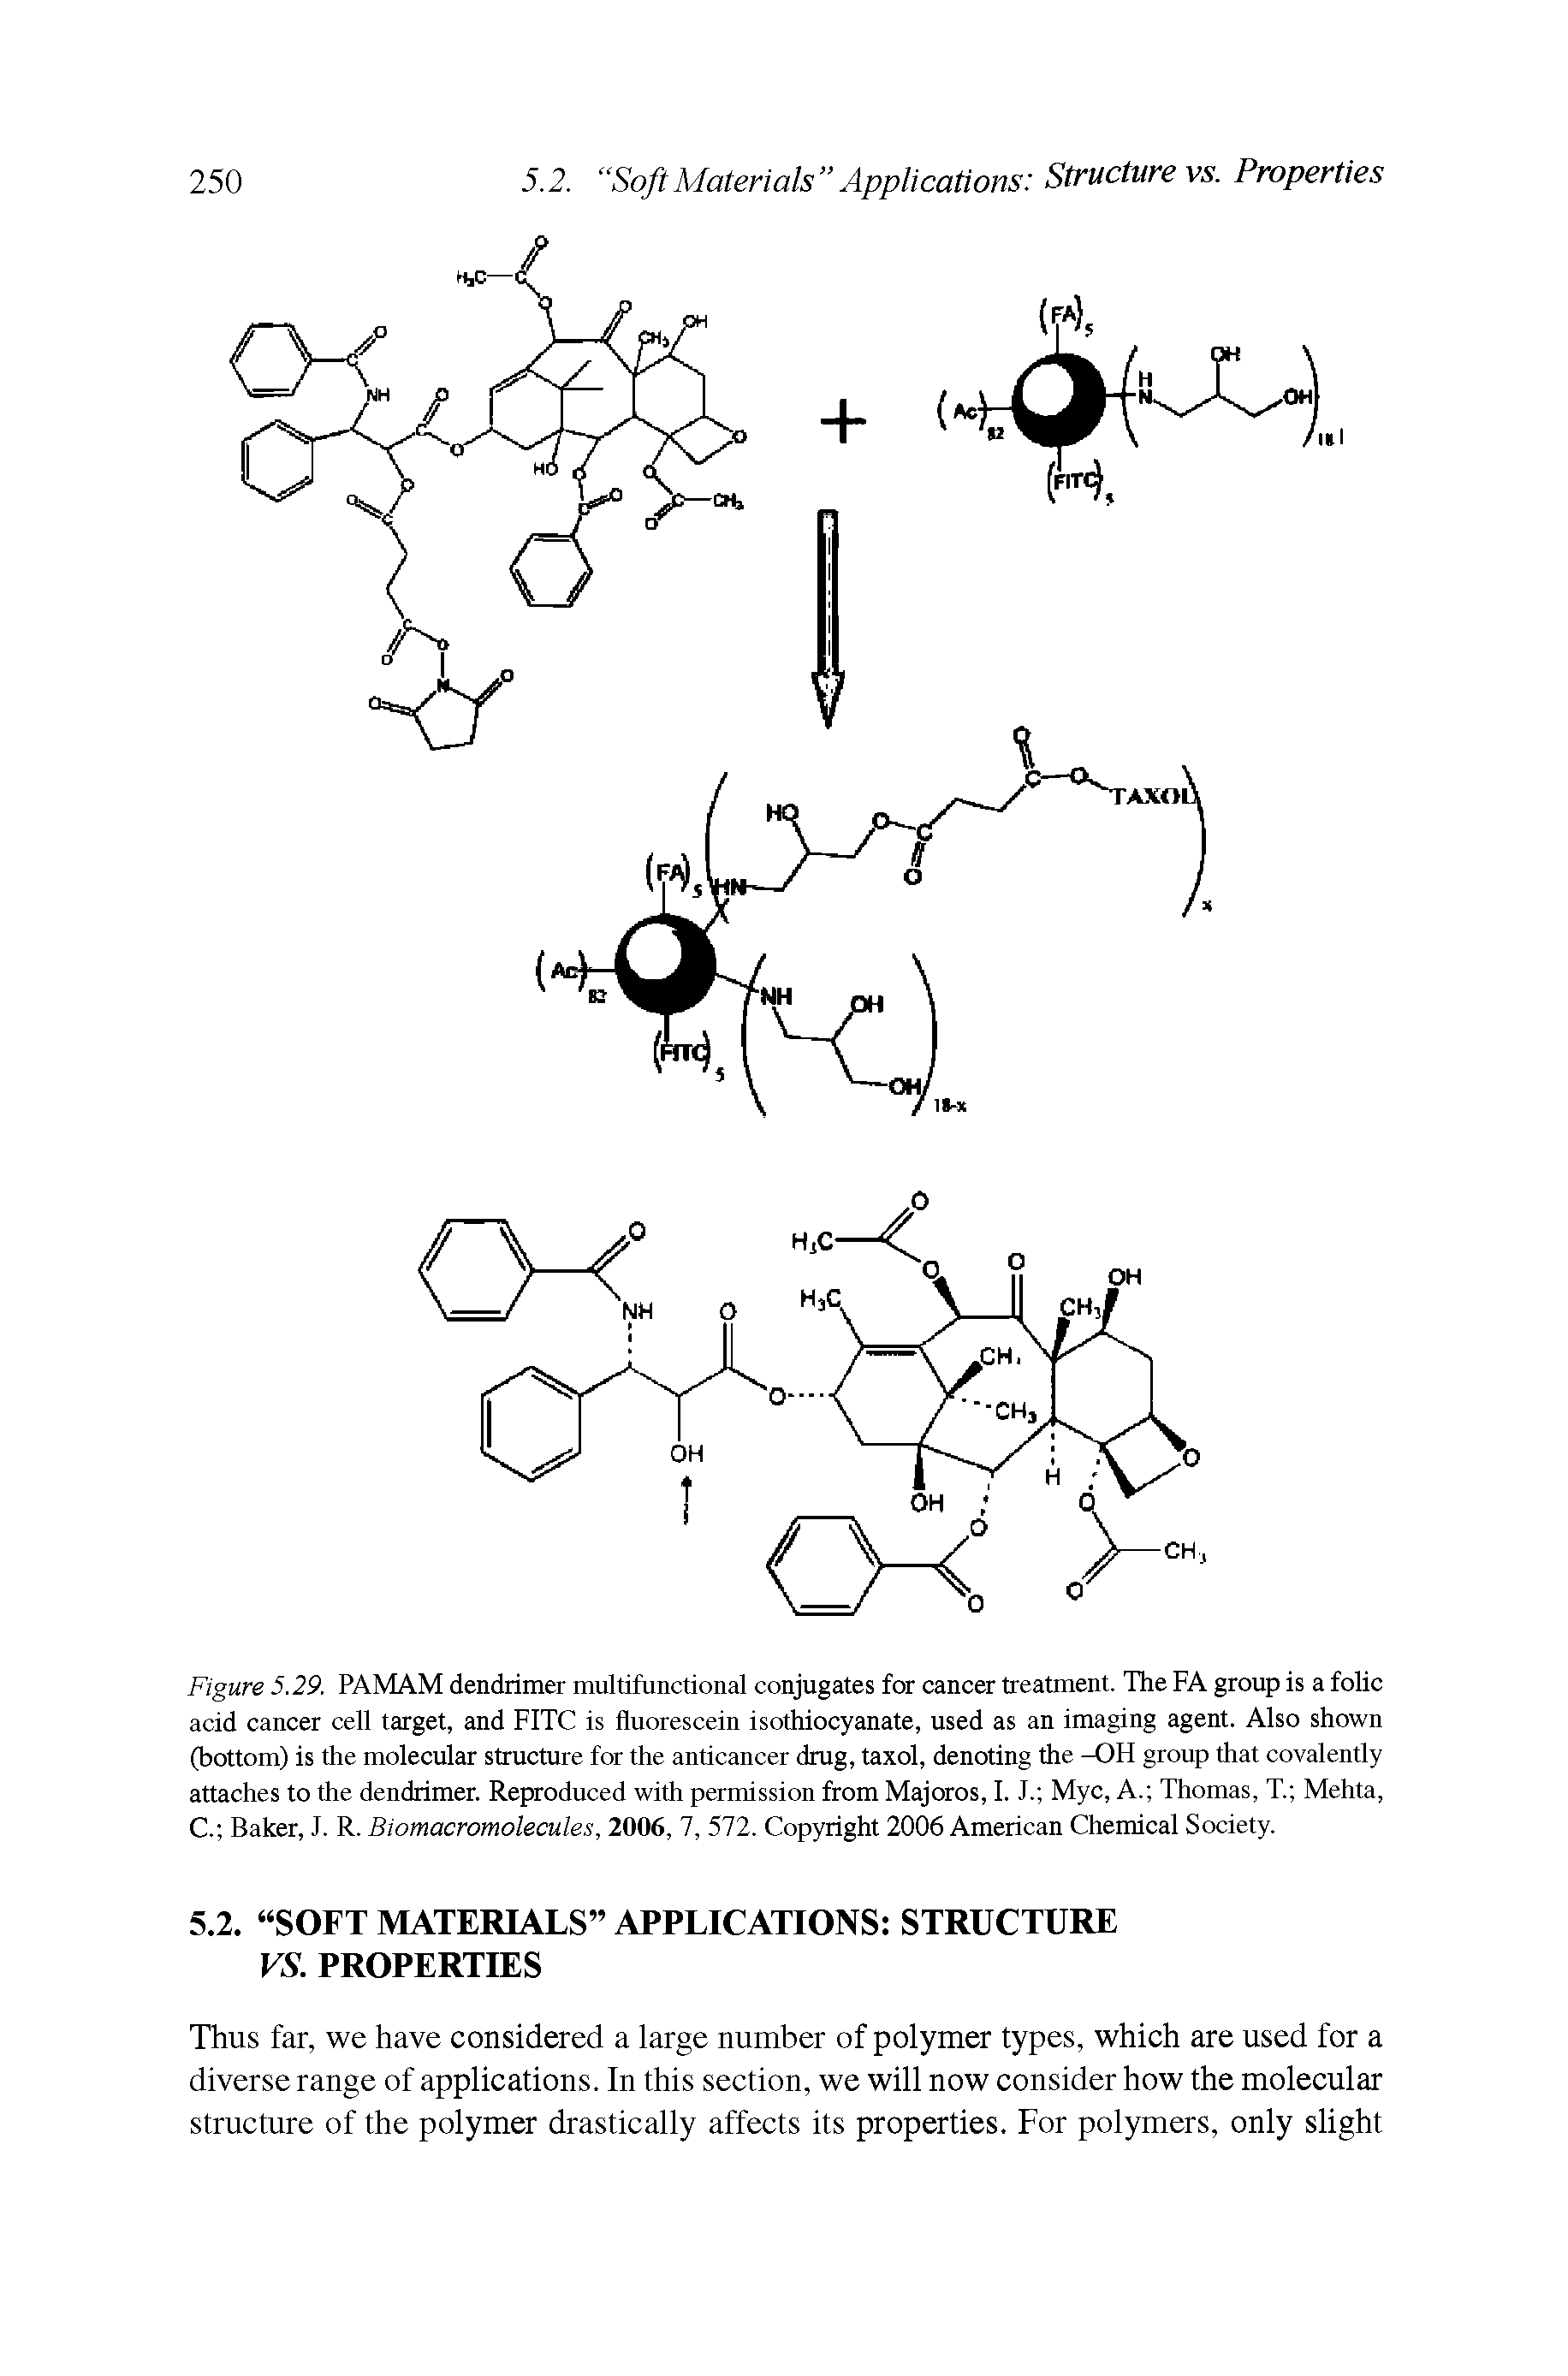 Figure 5.29. PAMAM dendrimer multifunctional conjugates for cancer treatment. The FA group is a folic acid cancer cell target, and FITC is fluorescein isothiocyanate, used as an imaging agent. Also shown (bottom) is the molecular structure for the anticancer drug, taxol, denoting the -OH group that covalently attaches to the dendrimer. Reproduced with permission from Majoros, I. J. Myc, A. Thomas, T Mehta, C. Baker, J. R. Biomacromolecules, 2006, 7, 572. Copyright 2006 American Chemical Society.